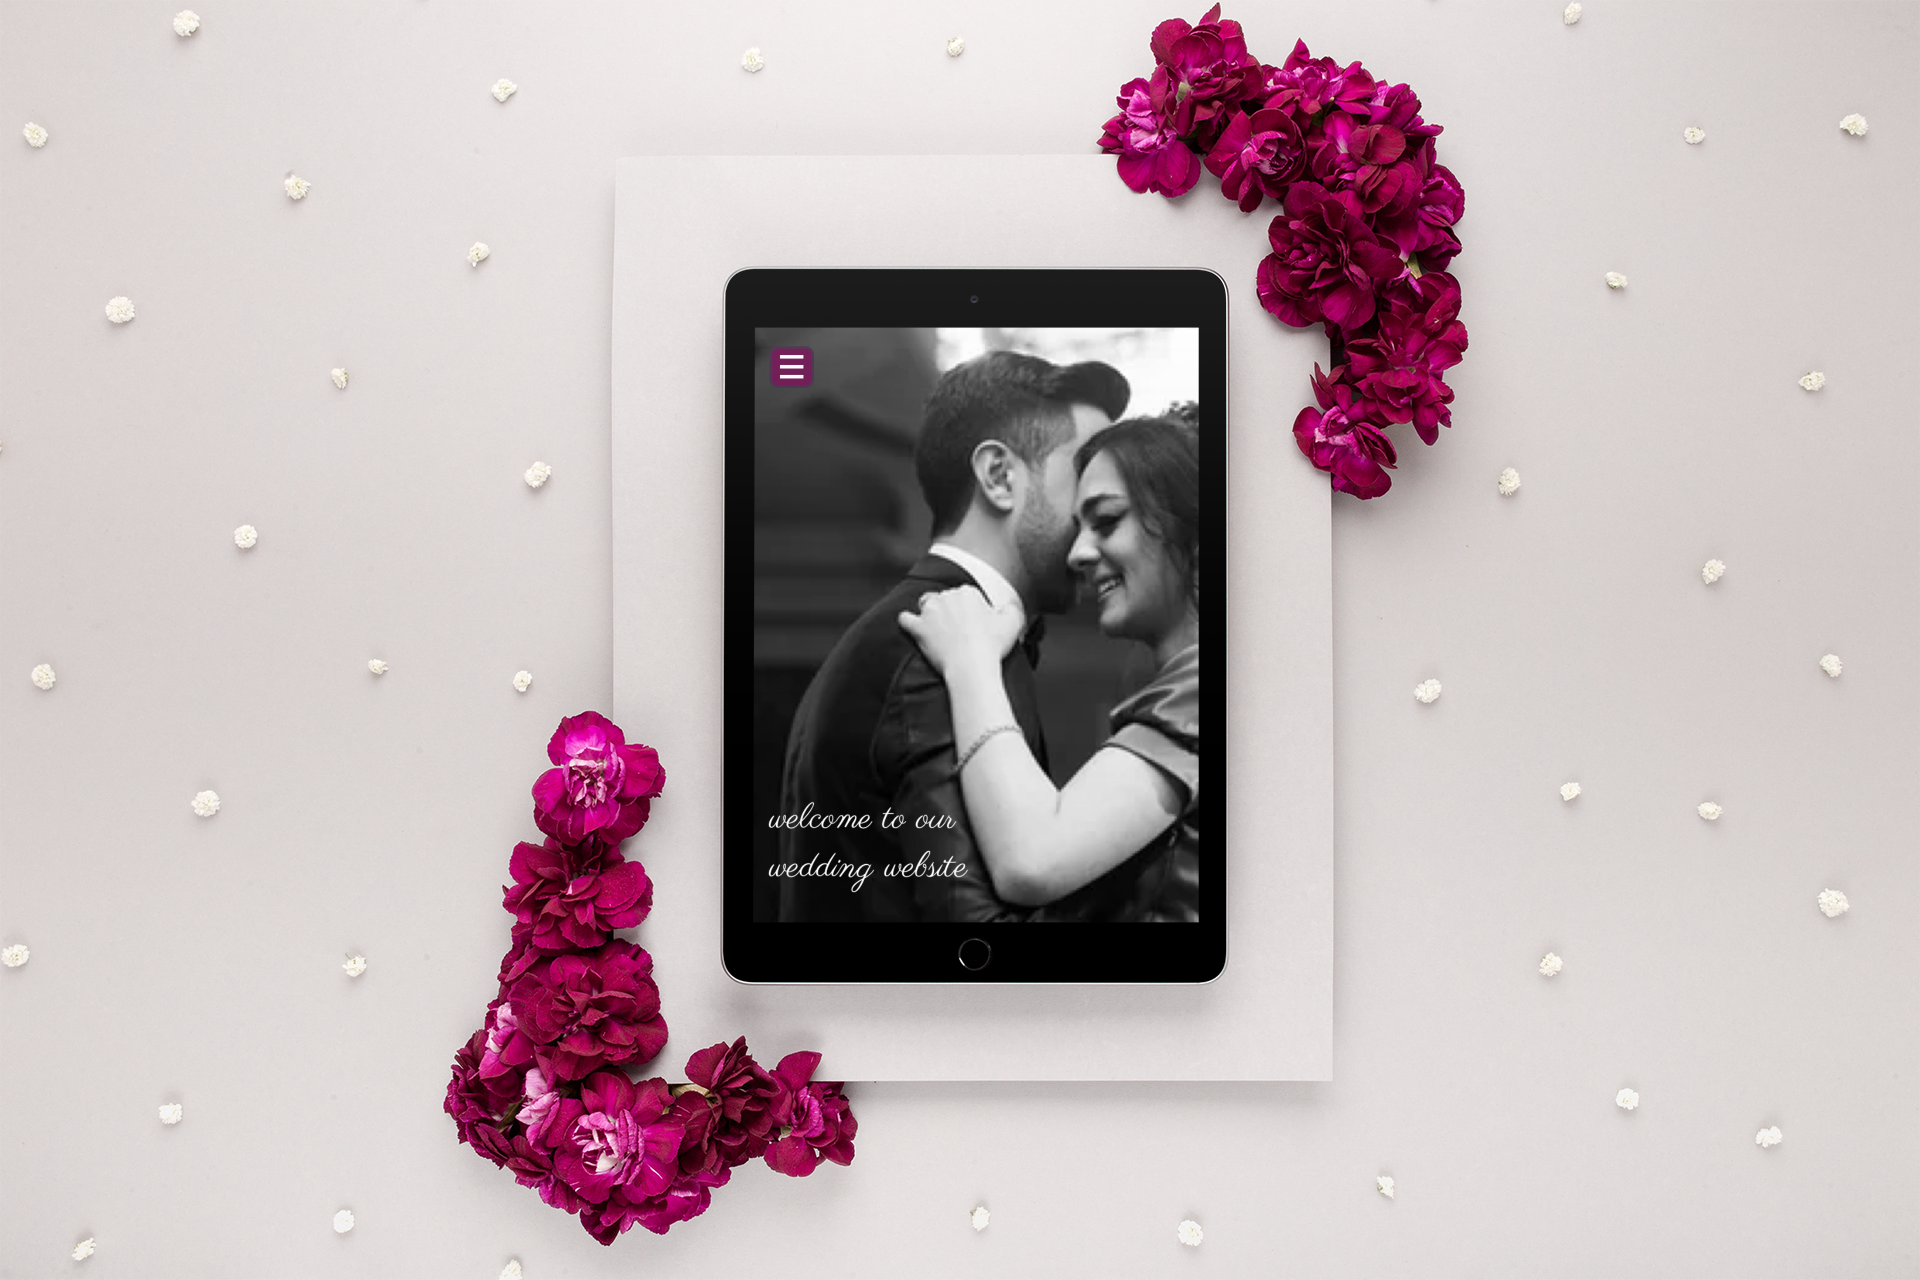 ipad displaying wedding website created by RSVPify's wedding website builder